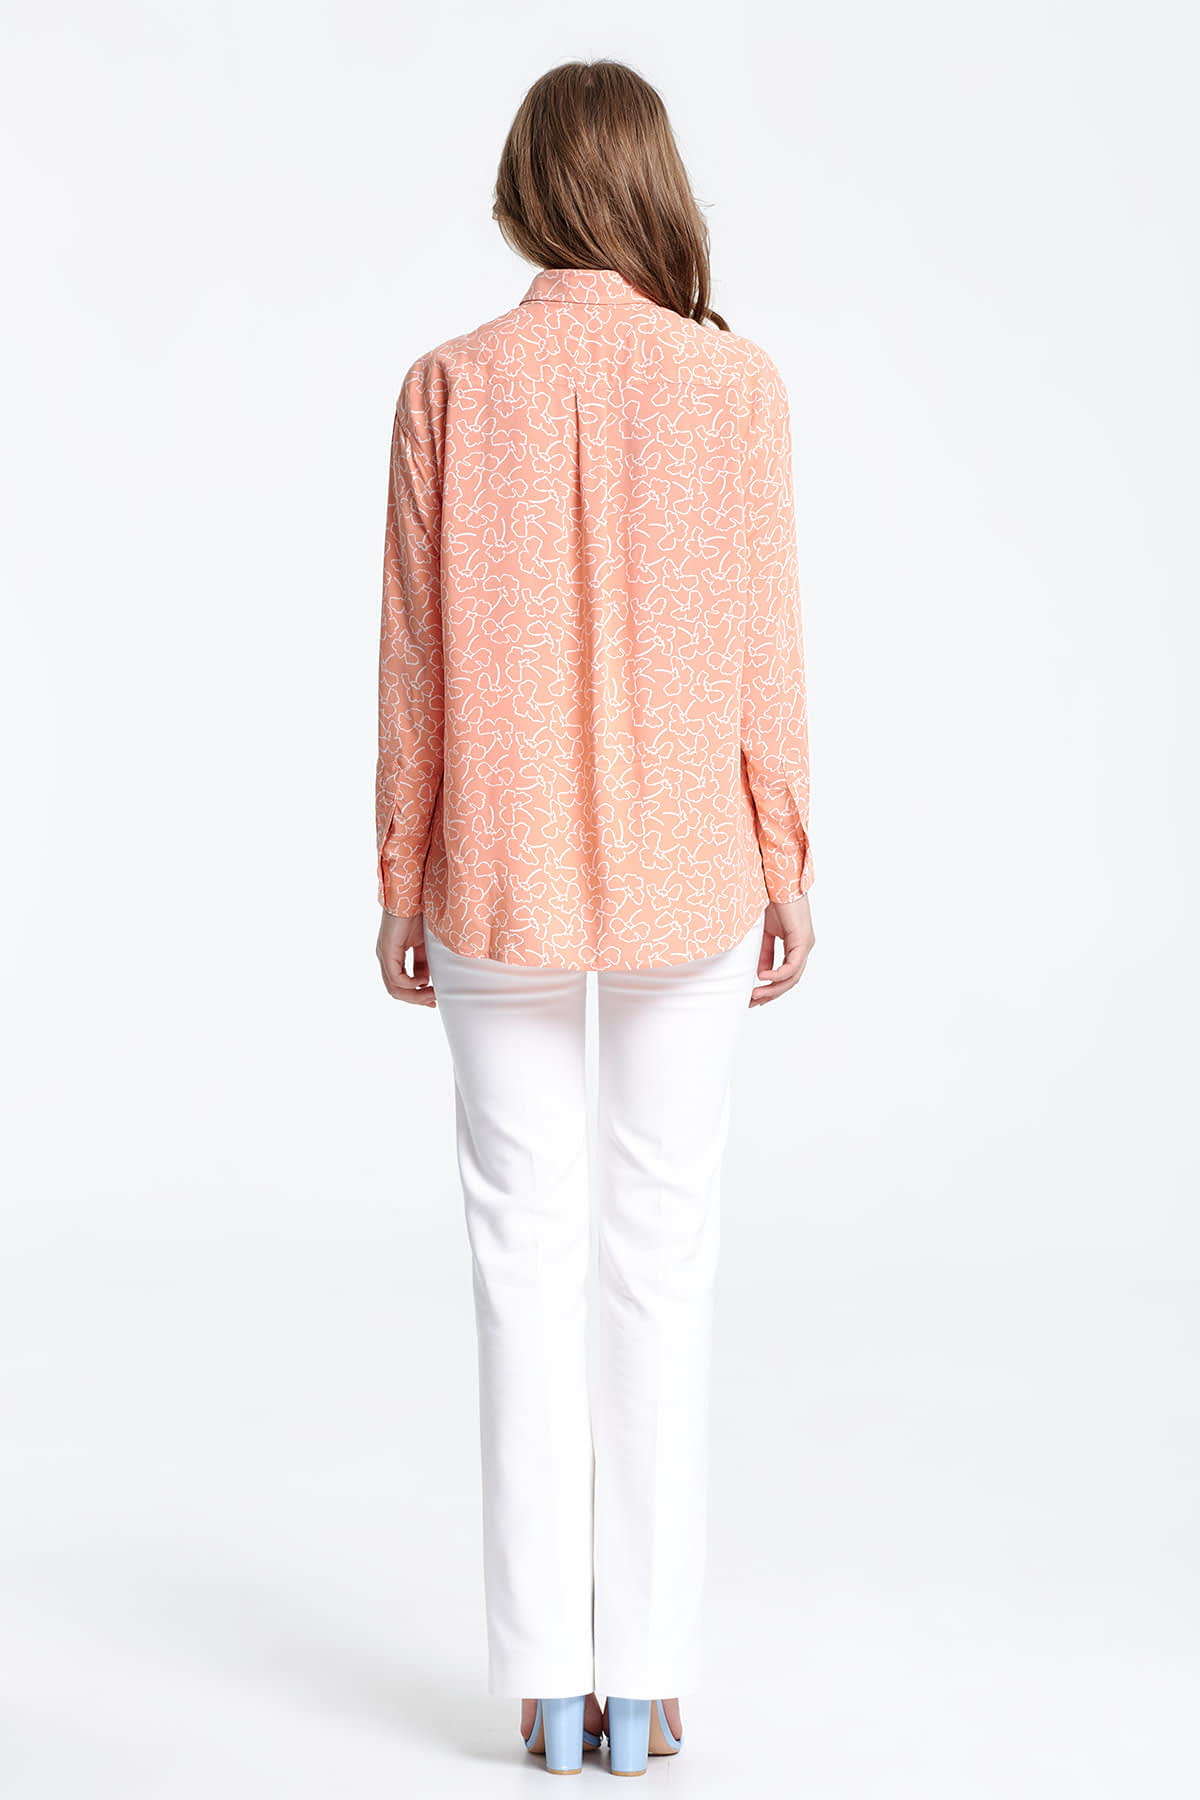 Swing peach-colored shirt with white flowers , photo 3